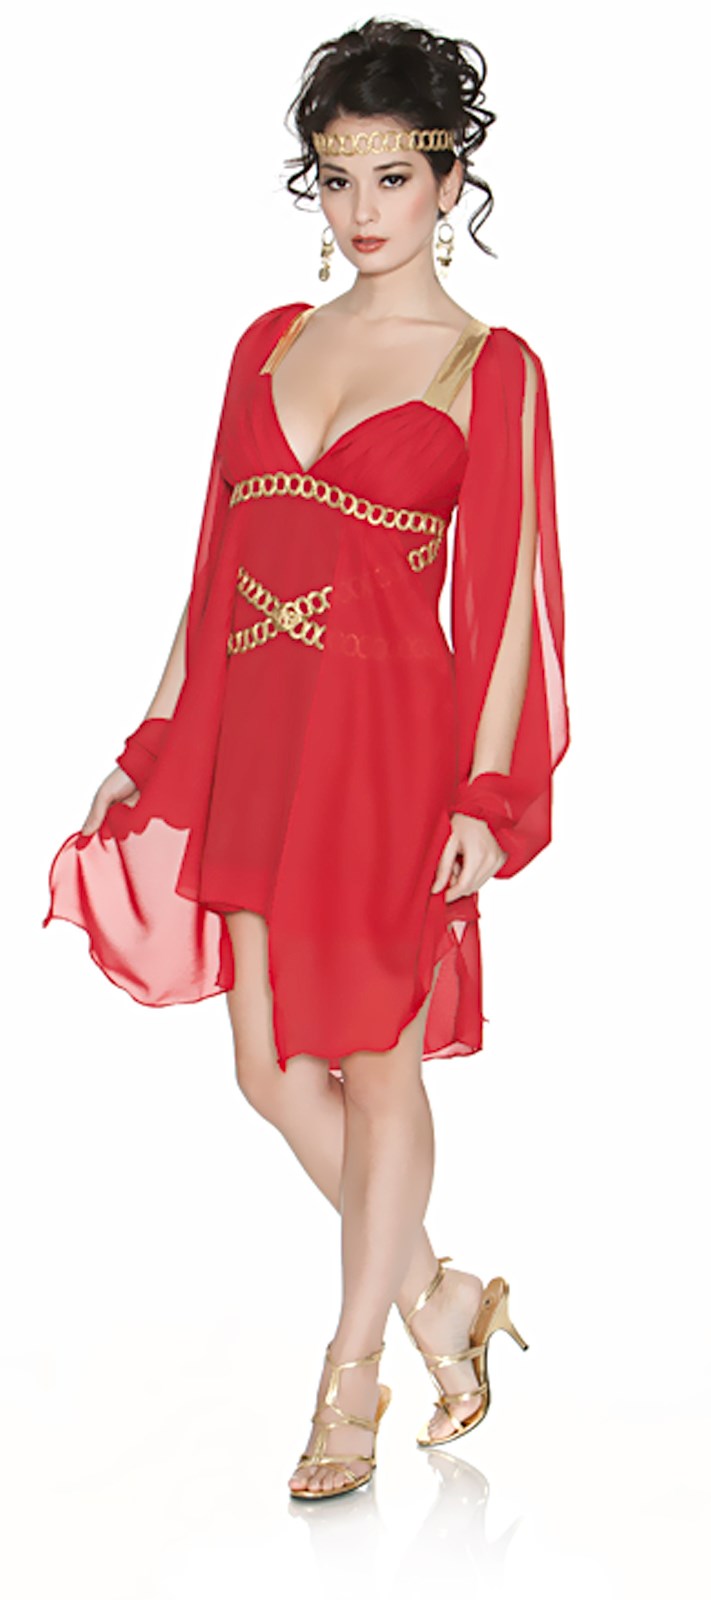 Goddess in Red Adult Costume